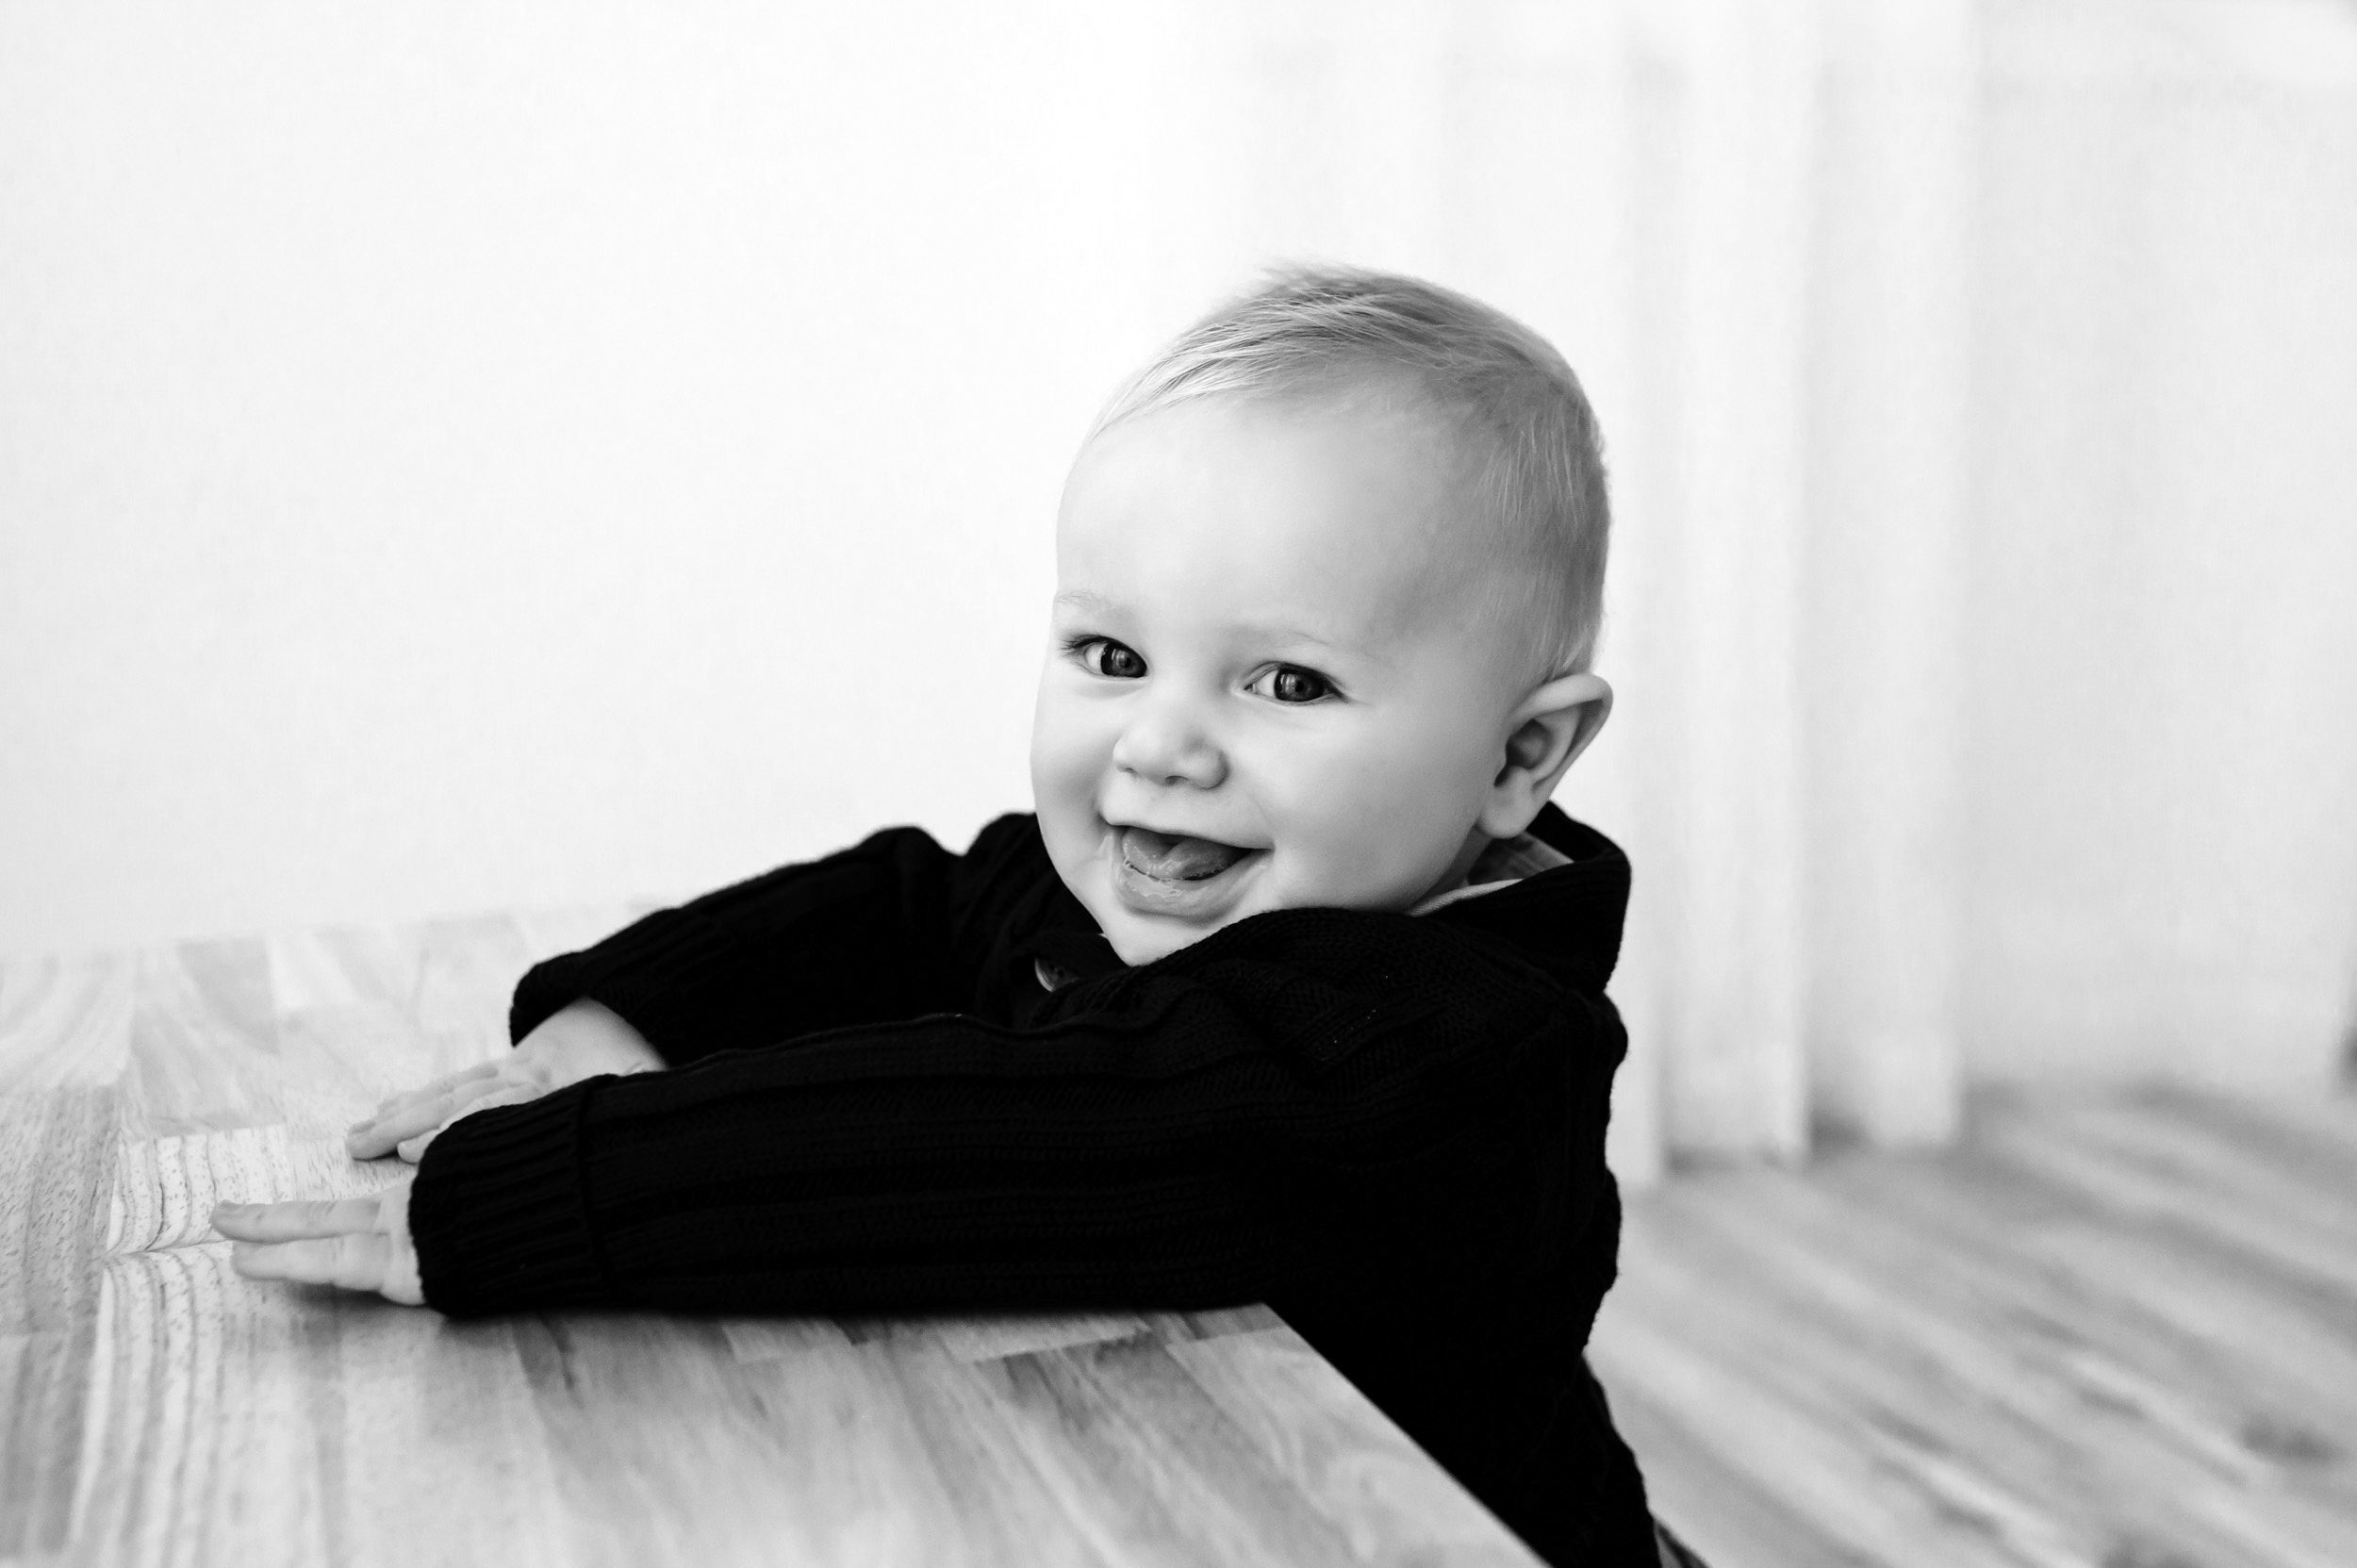 a black and white picture of a baby boy holding onto a wooden bench and smiling at the camera during a baby milestone photography session